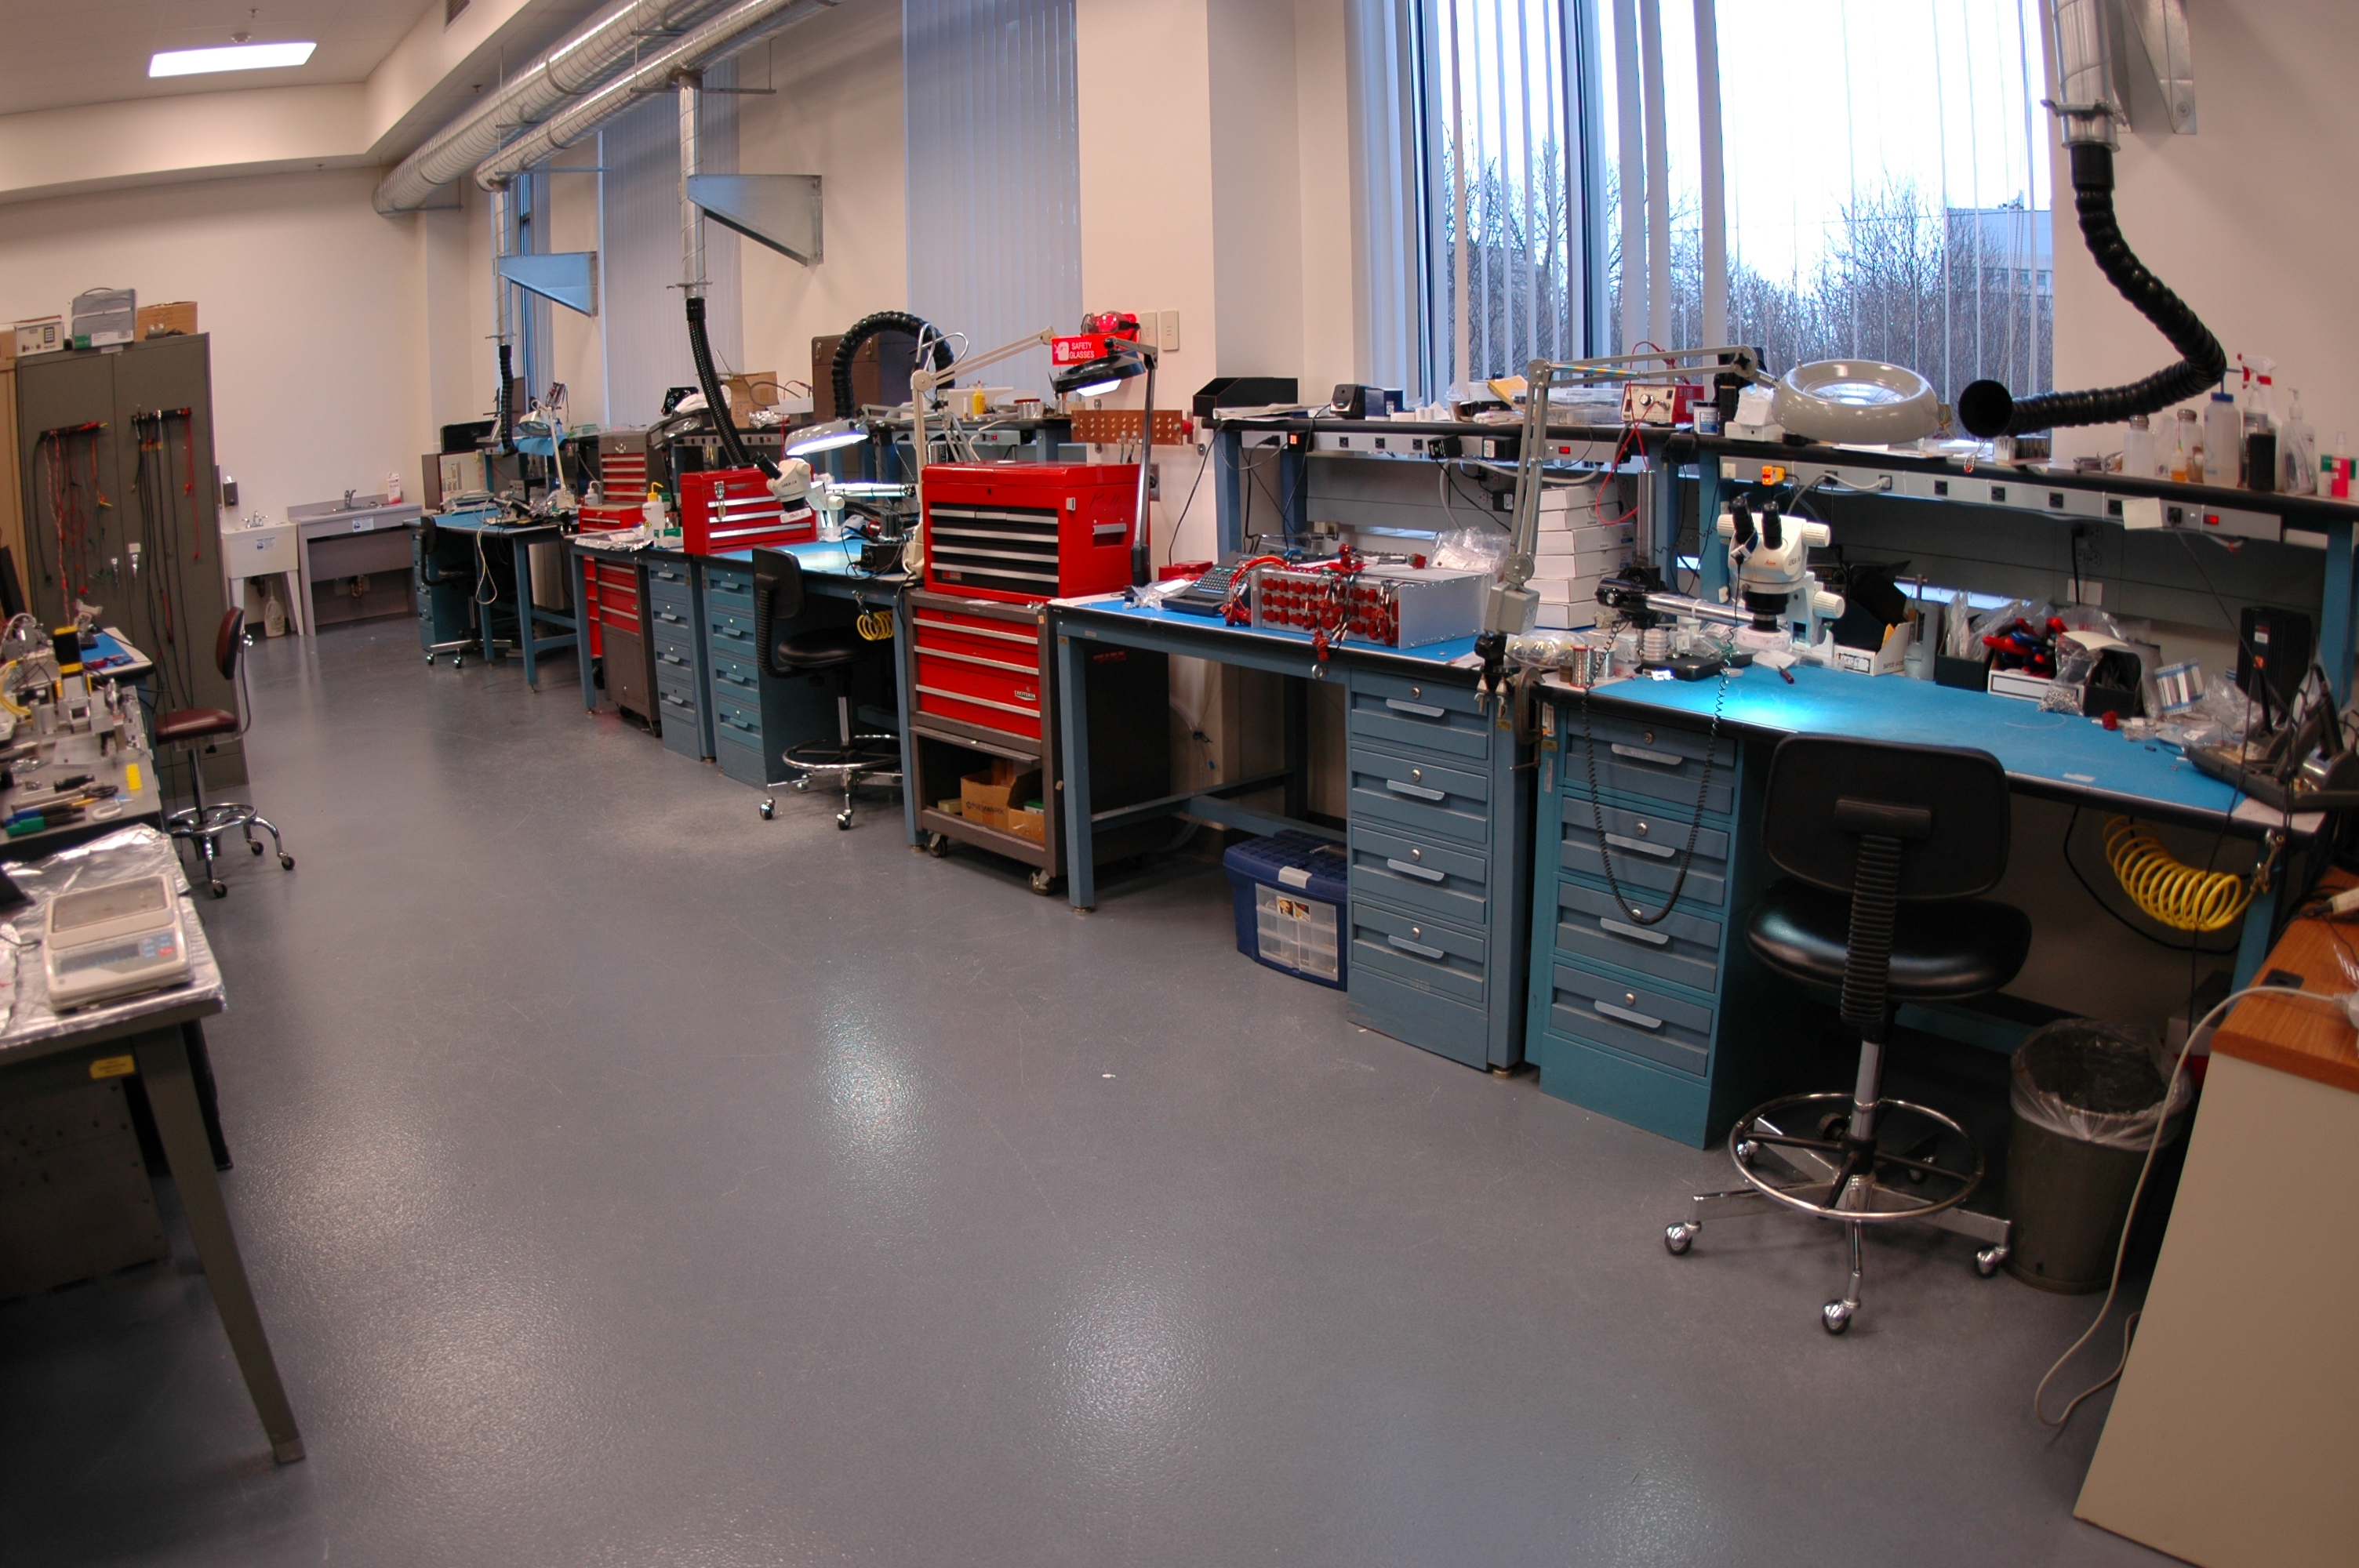 Huge sweep of laboratory/workshop/factory electronic component